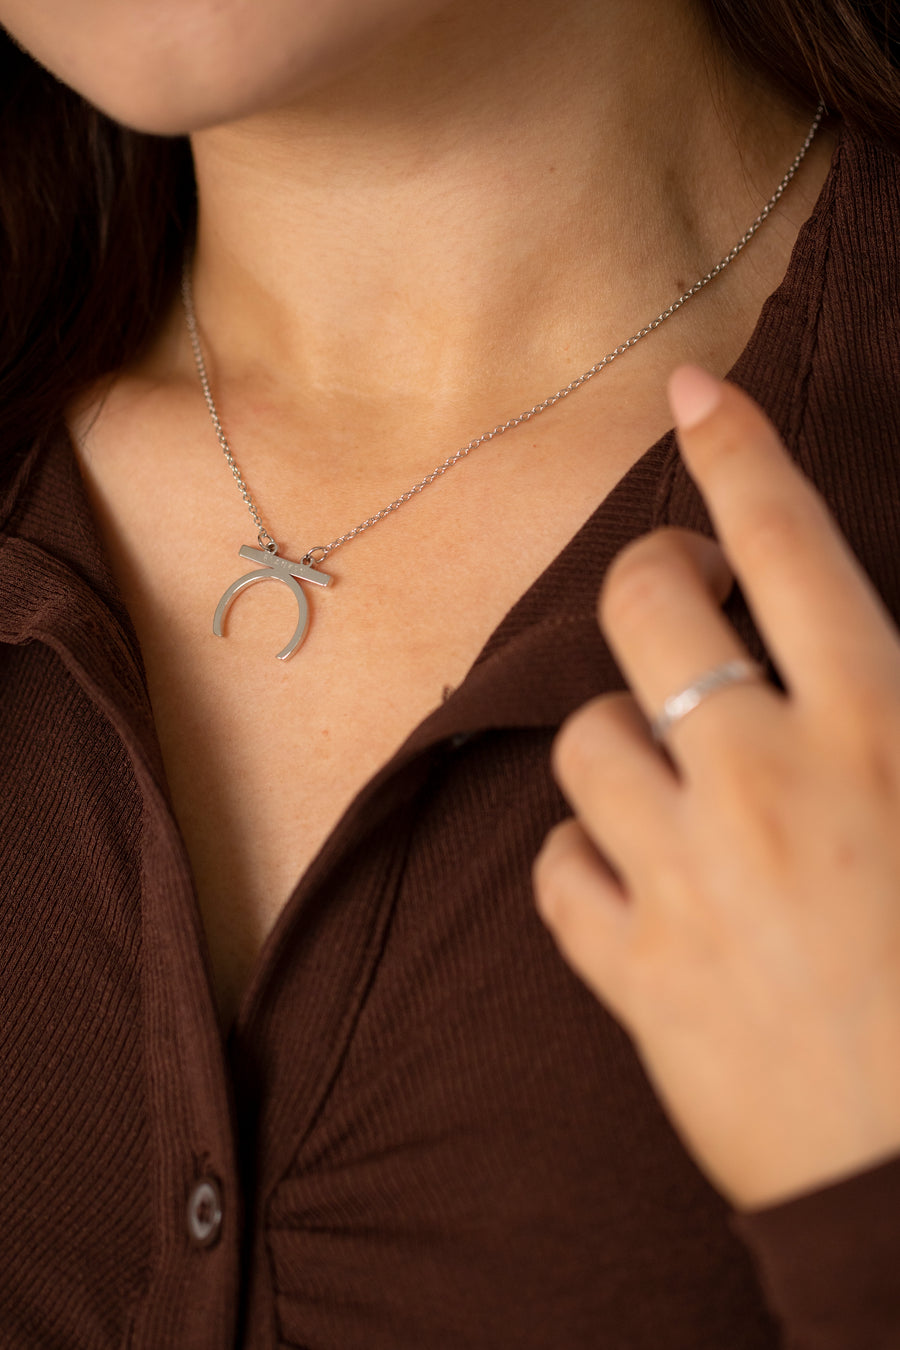 Female Empowerment Crescent Moon Necklace Silver (925 Sterling Silver)